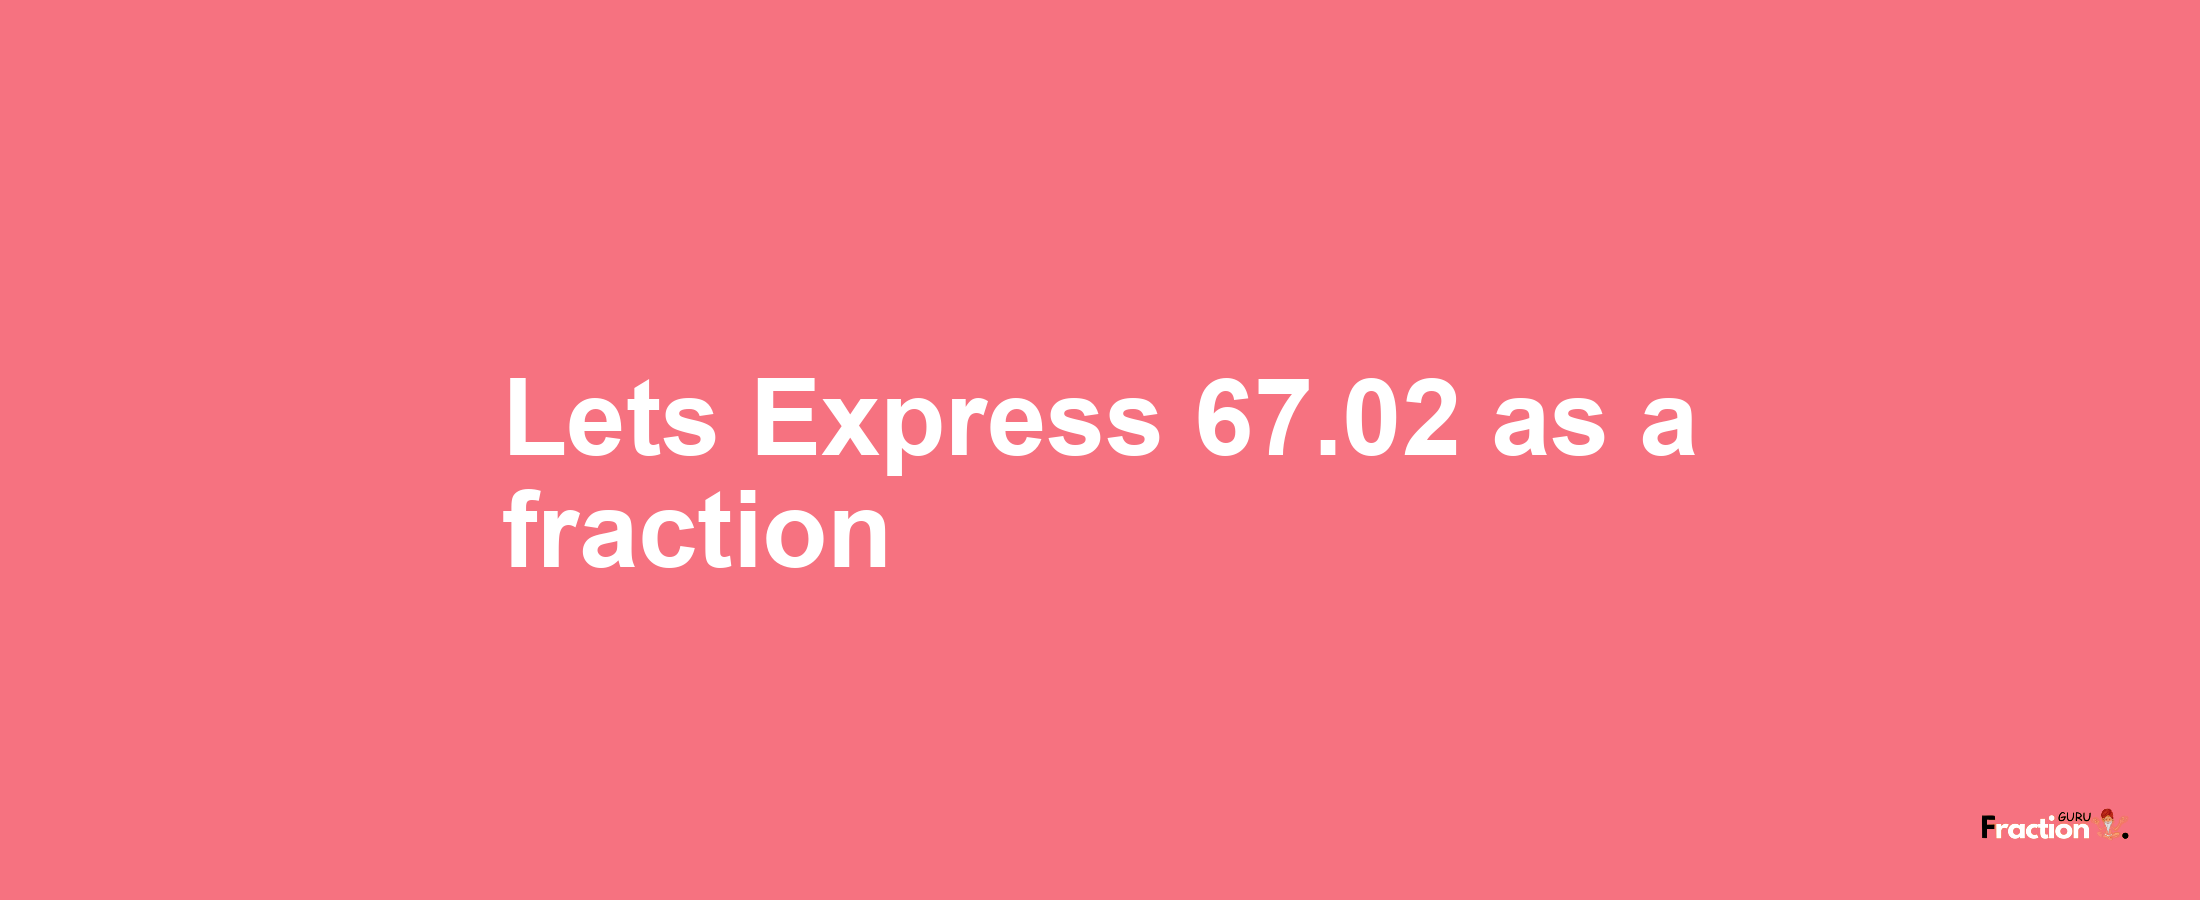 Lets Express 67.02 as afraction